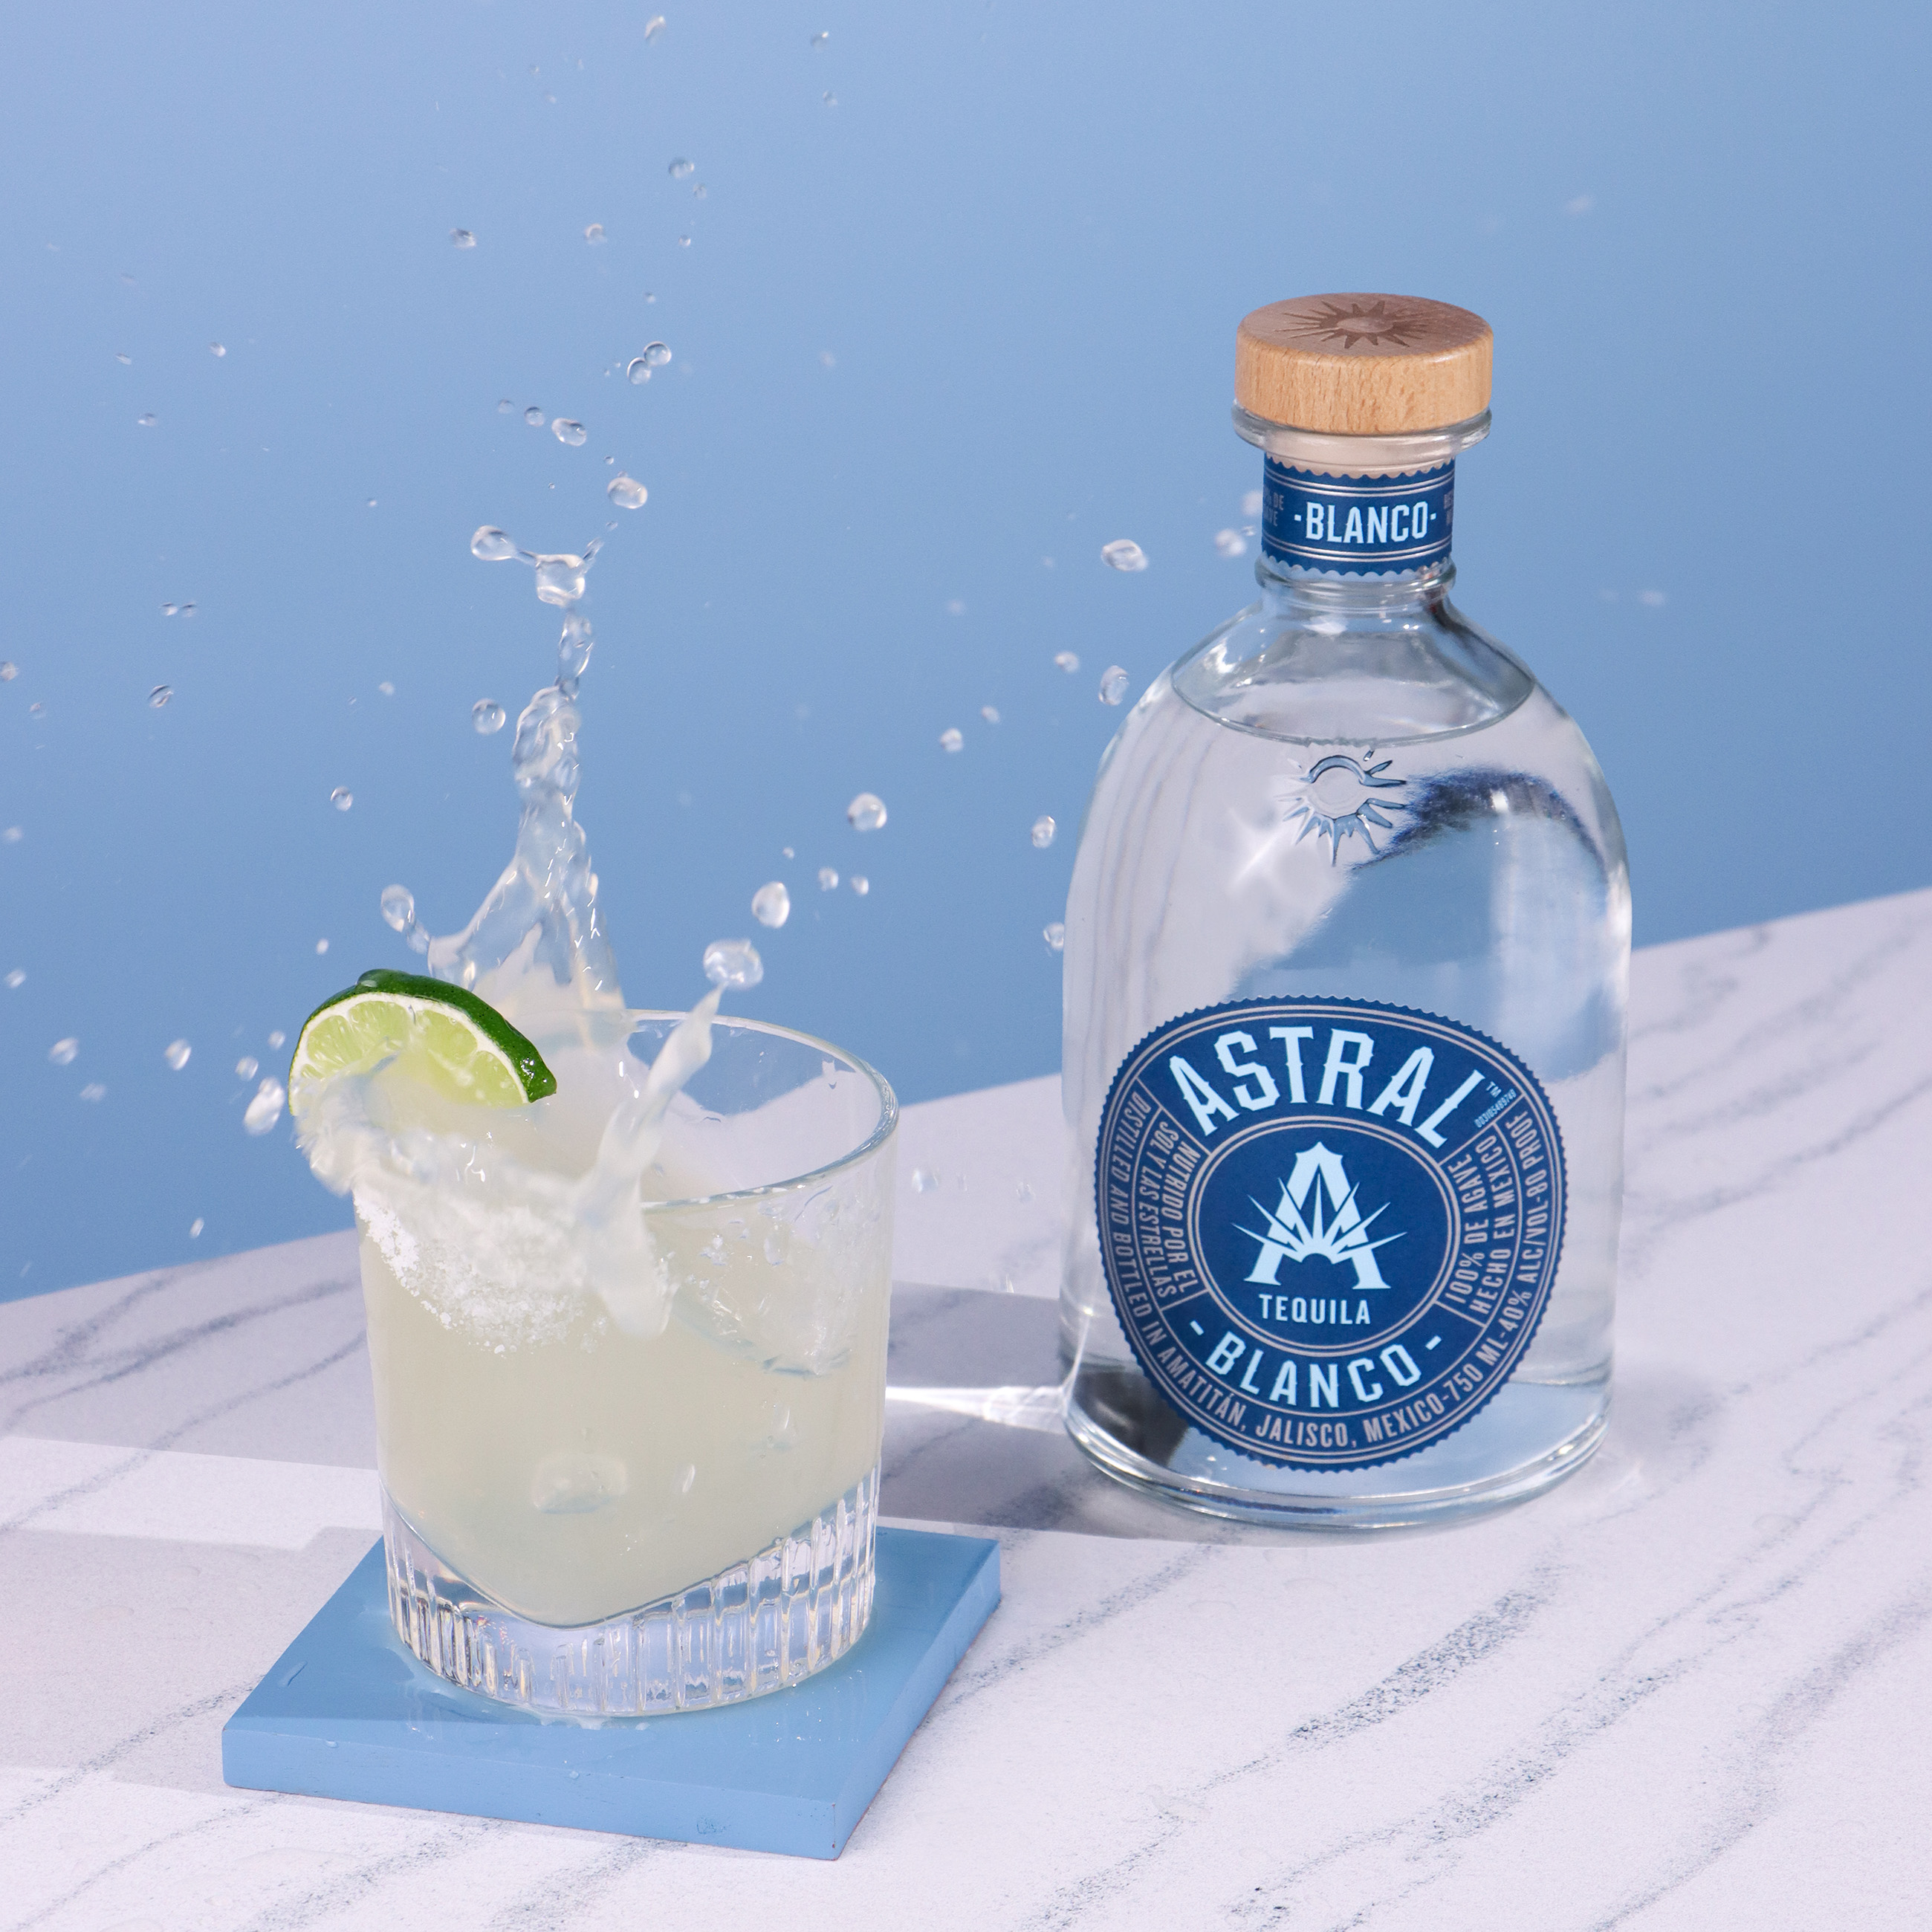 Astral Tequila upcycles spent agave from tequila distillation into bricks to build homes, so every Astral margarita made goes towards a good cause.